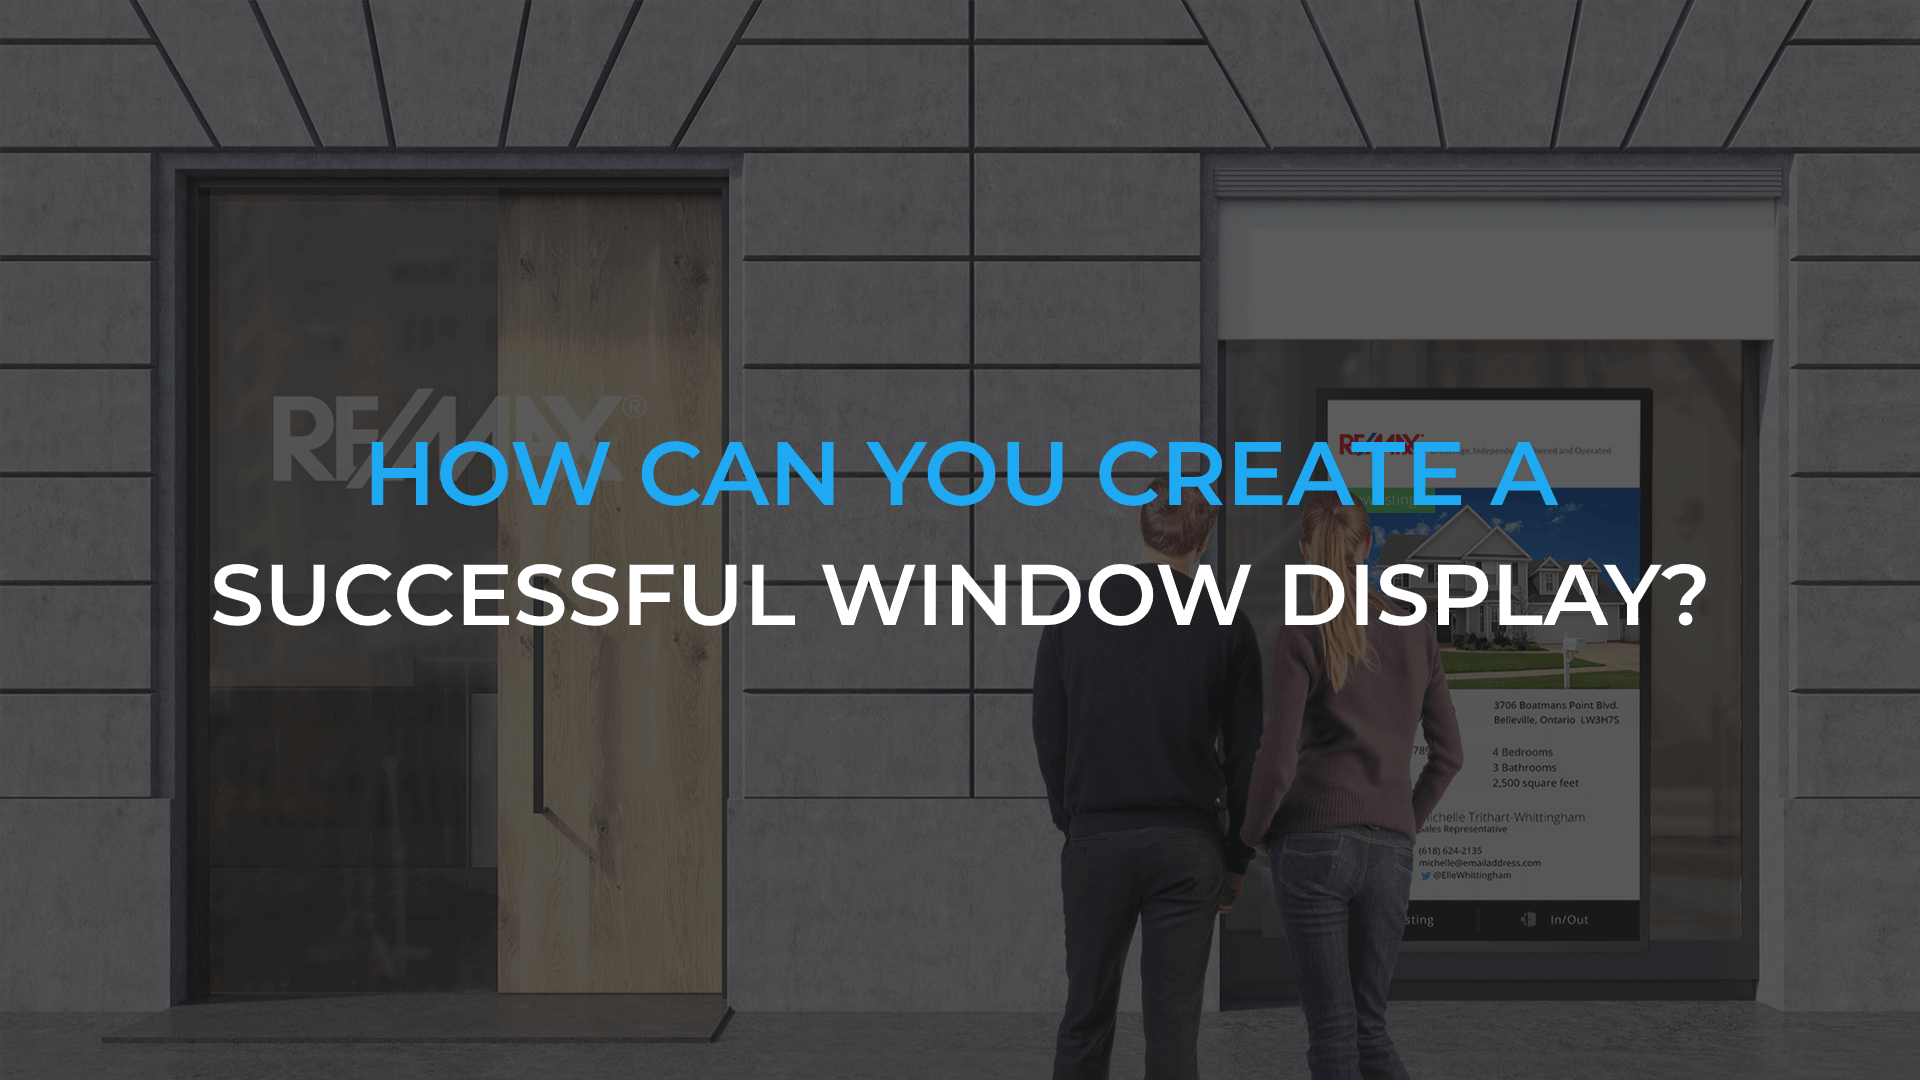 How can you create a successful window display?